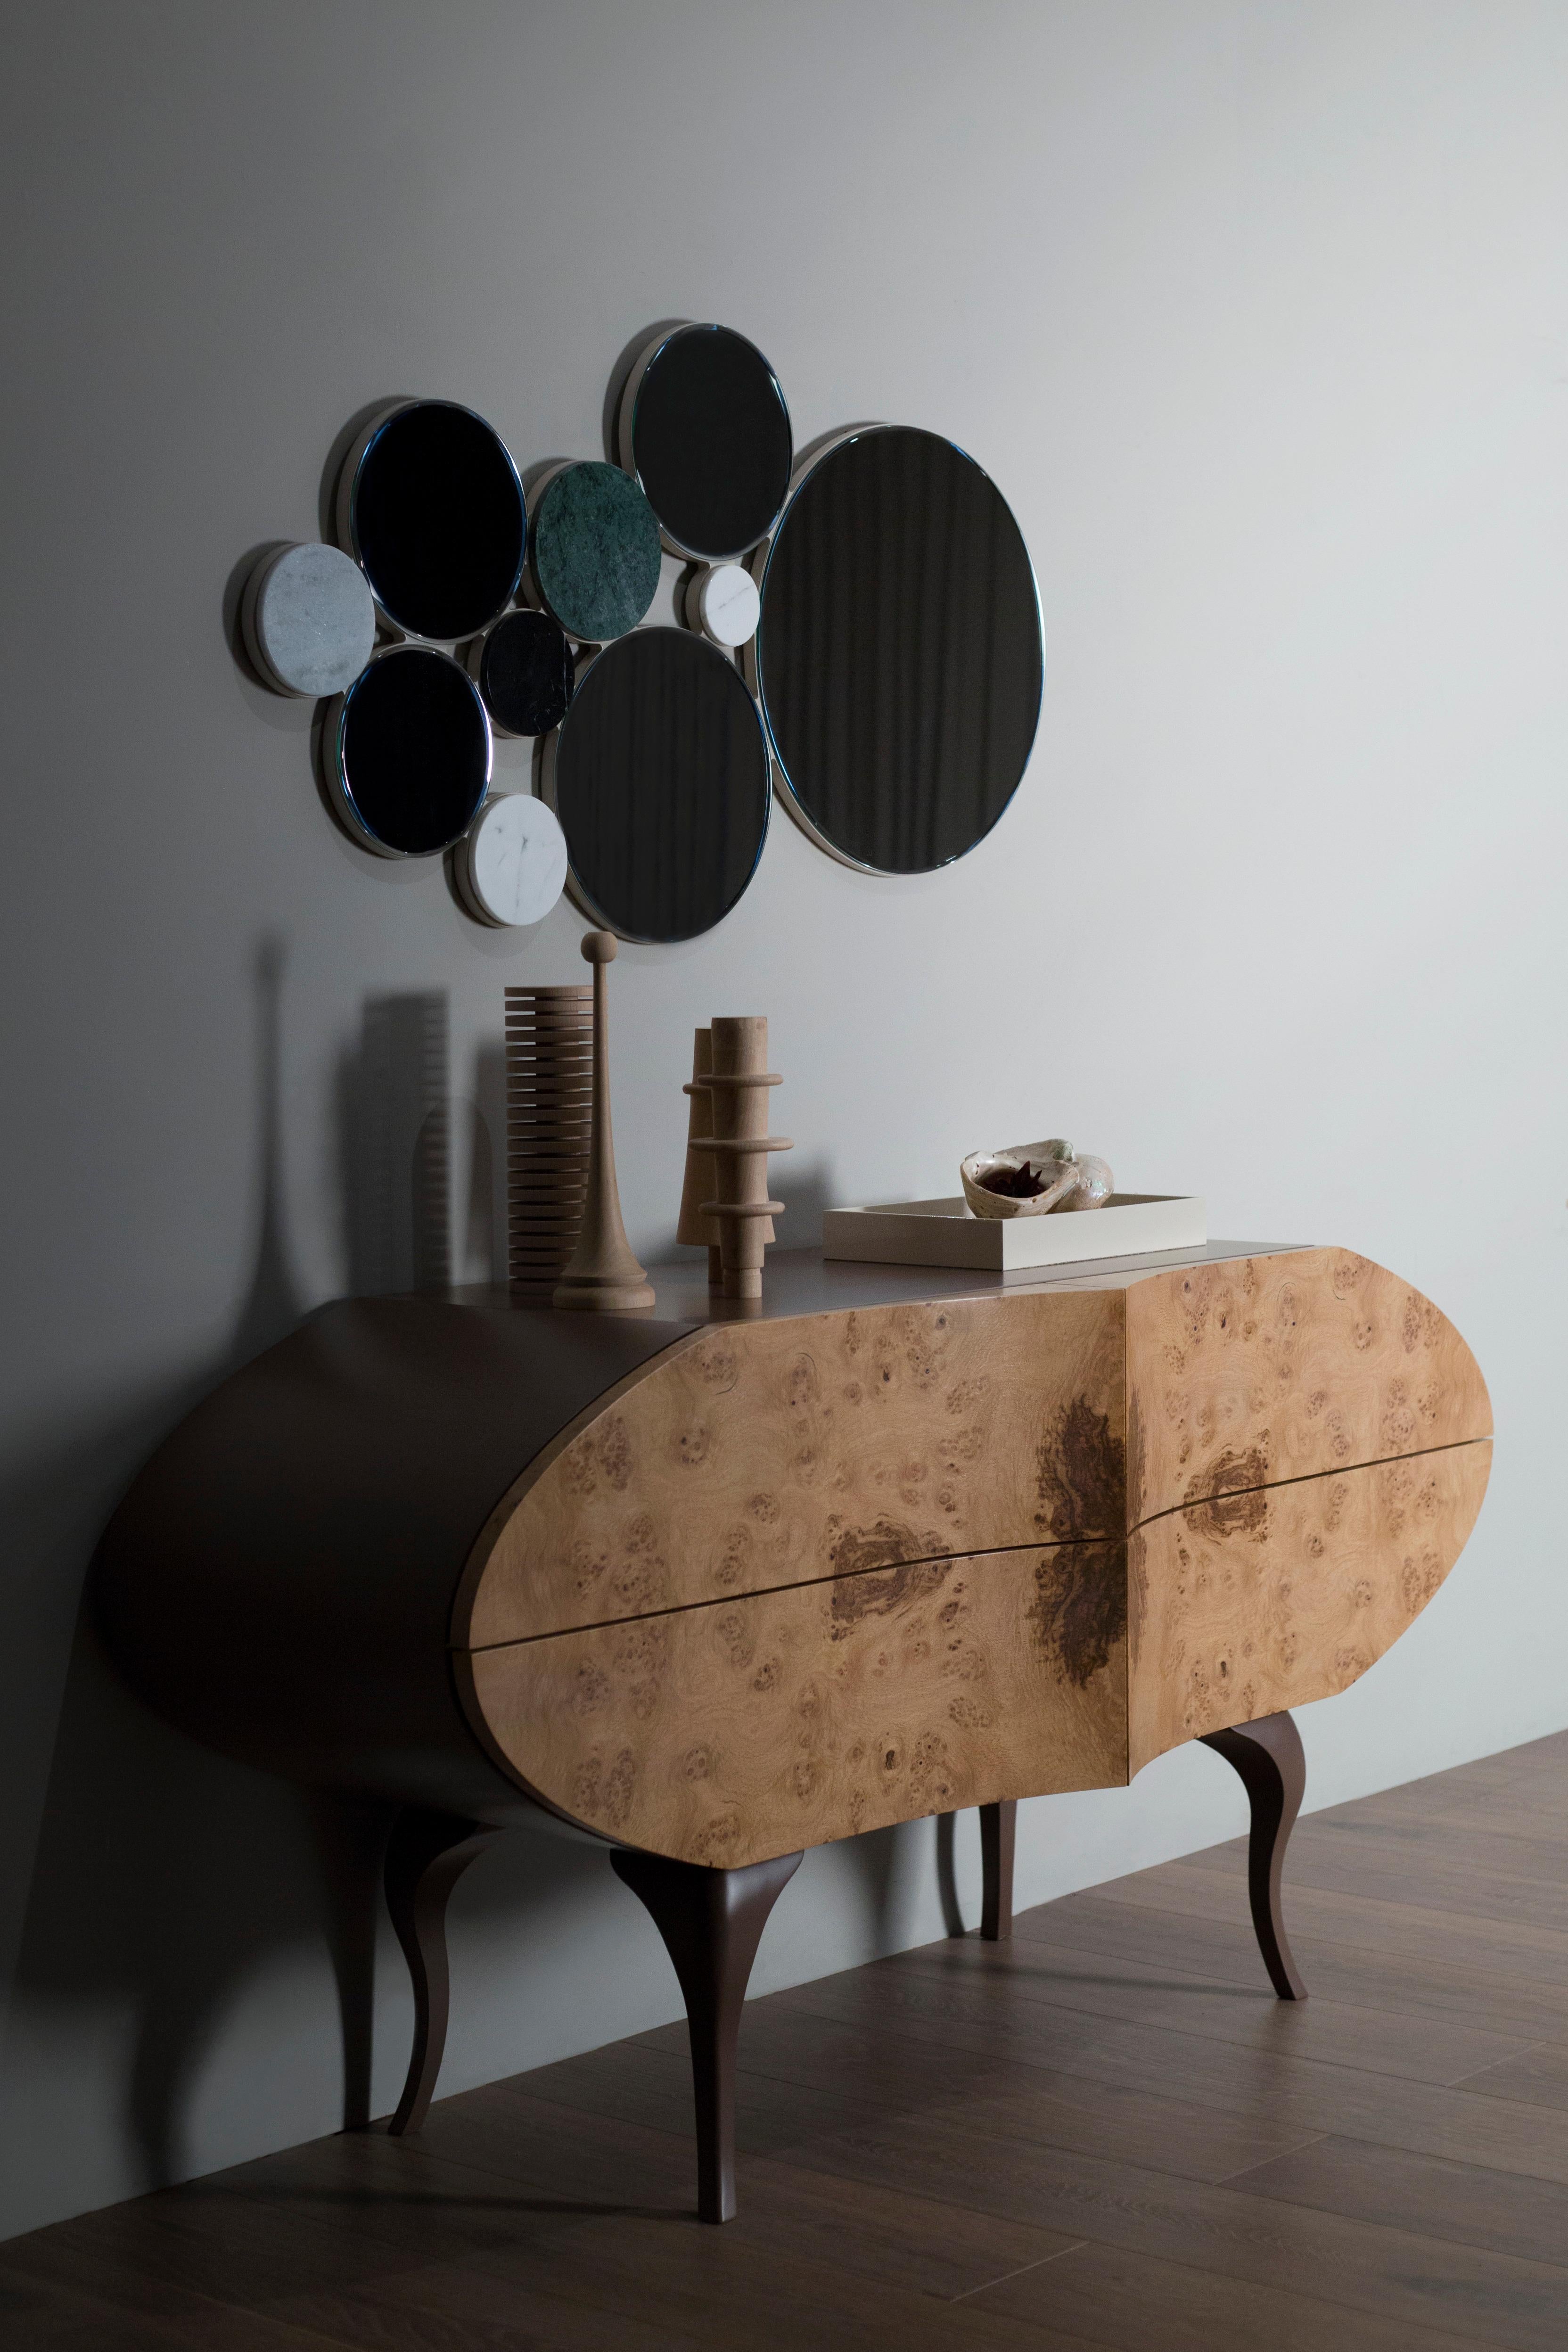 Beans Sideboard, Modern Collection, Handcrafted in Portugal - Europe by GF Modern.

When we started designing this four-drawer wooden sideboard, we were looking for a simple and sleek piece that would fit in easily. A functional yet elegant